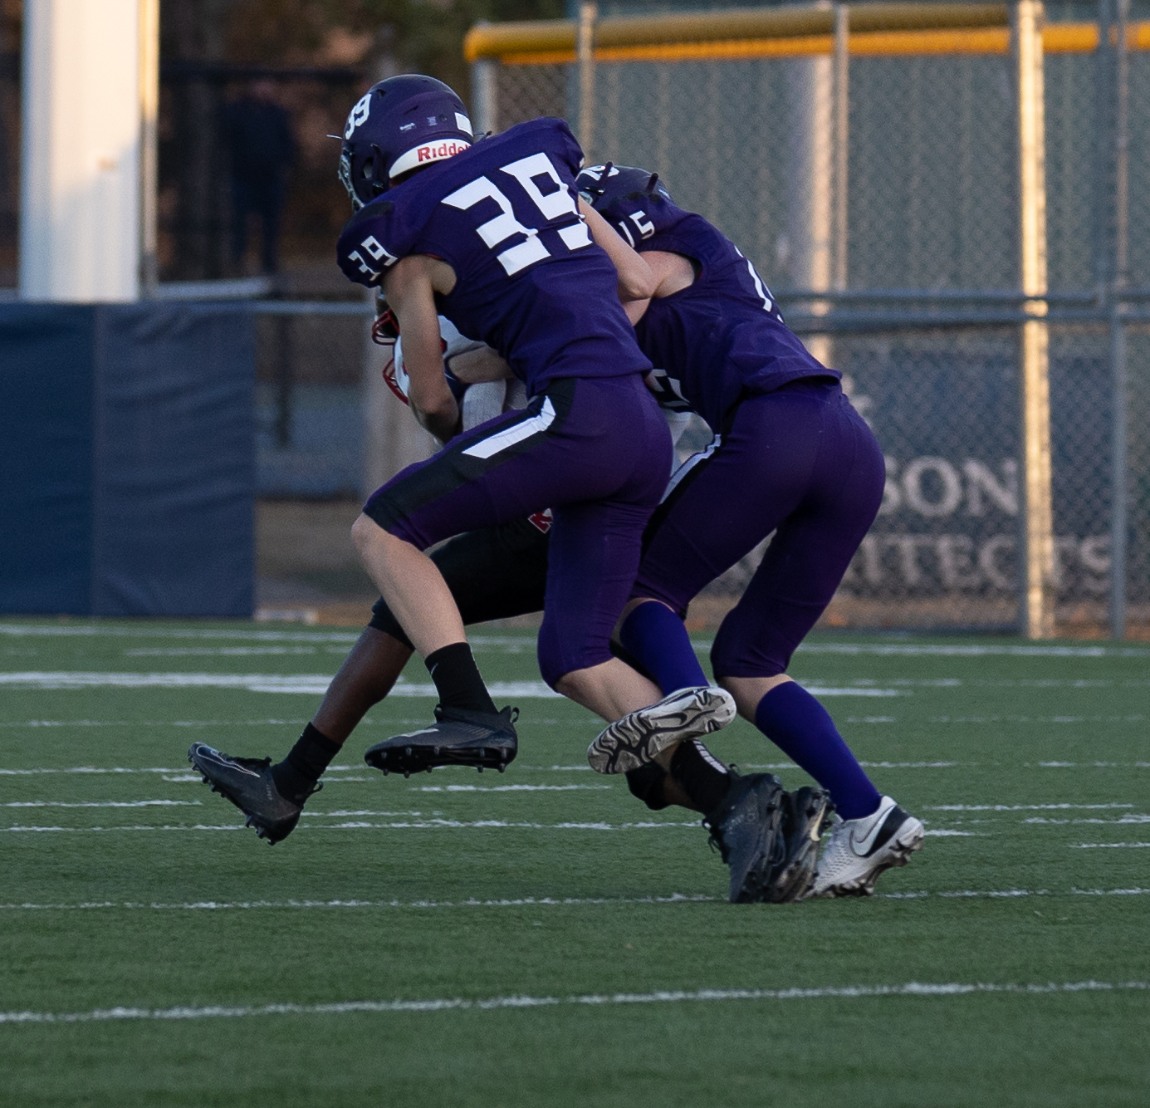 Eau-Claire-Memorial-JV-Football-LaCrosse-Central-at-Home-3-29-21-1483